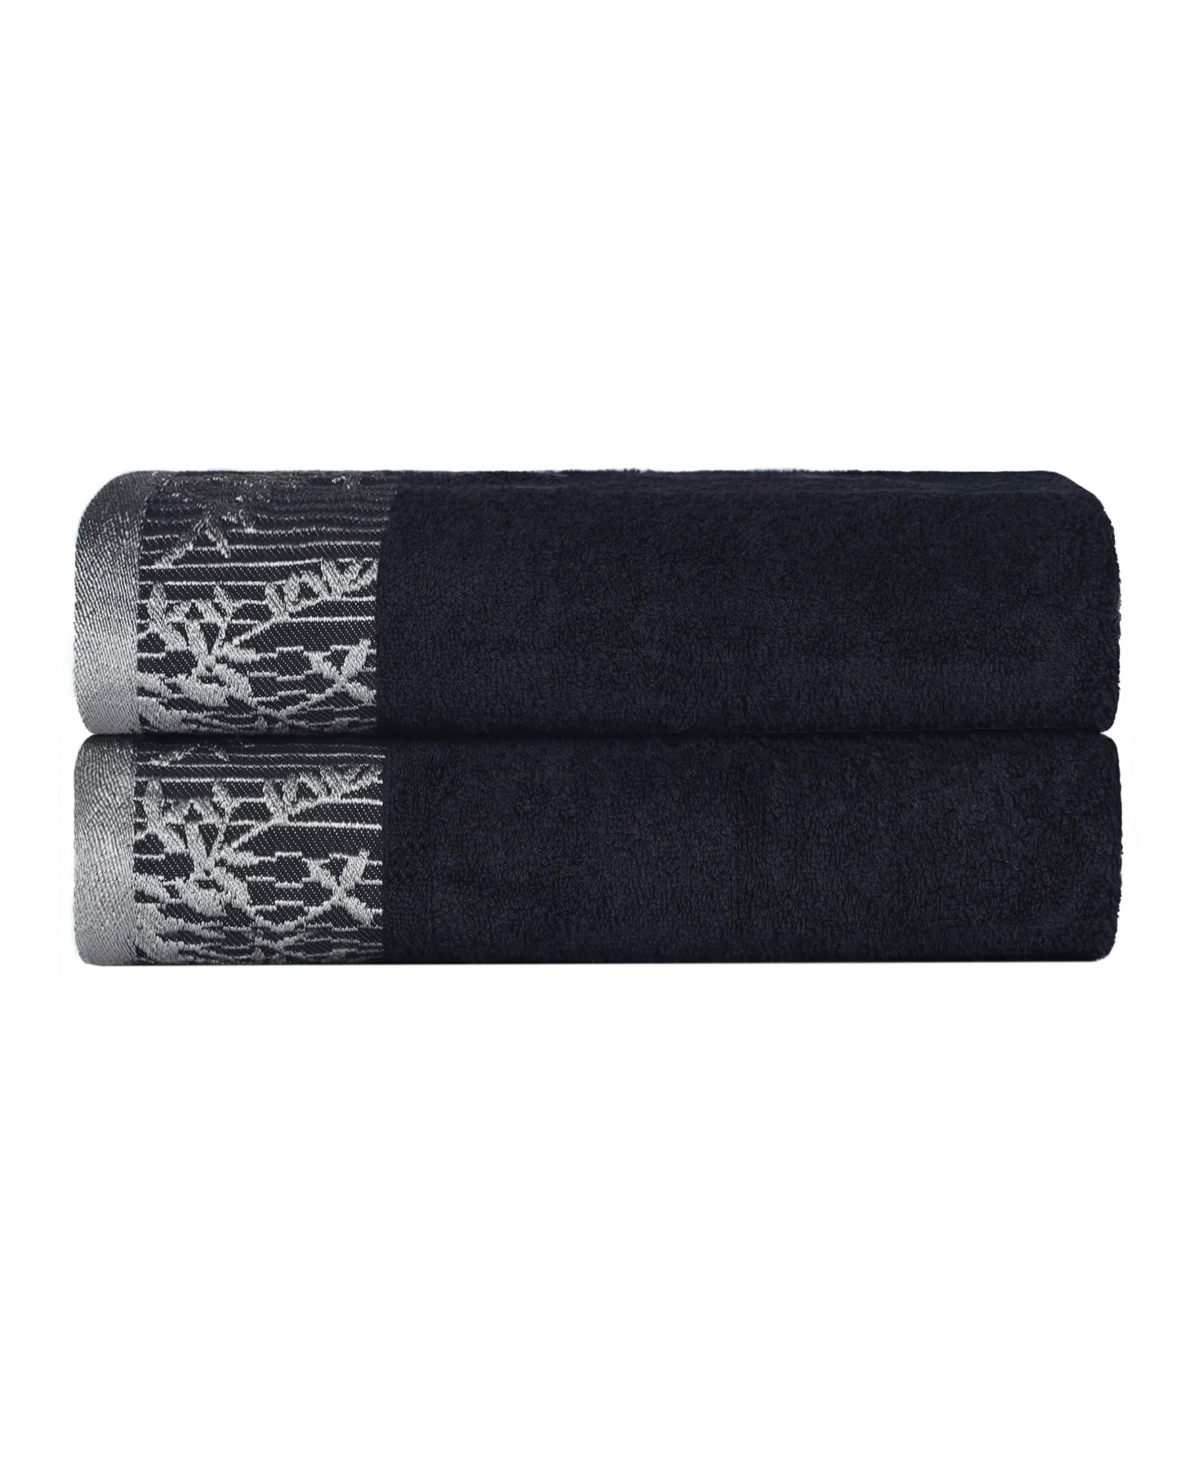 Superior Wisteria Floral Embroidered Jacquard Border Cotton Bath Towel Set, 2 Pieces In Gray